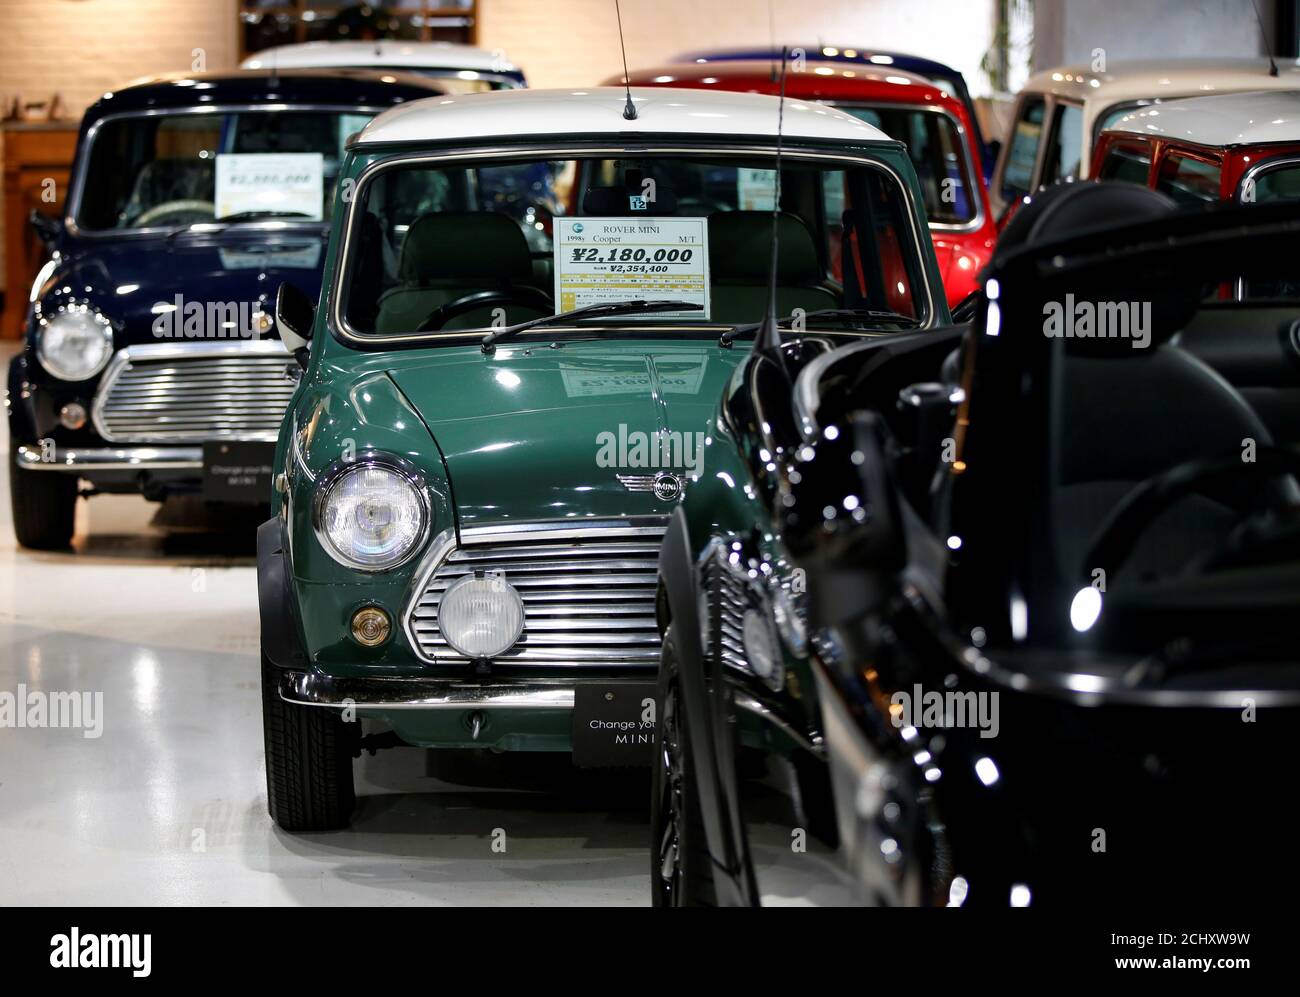 Rover Mini Cooper, Rover Mini Mayfair and Rover Mini Paul Smith cars are  displayed at the showroom of the "iR", a used Mini car dealer, in Tokyo,  Japan December 13, 2018. REUTERS/Issei